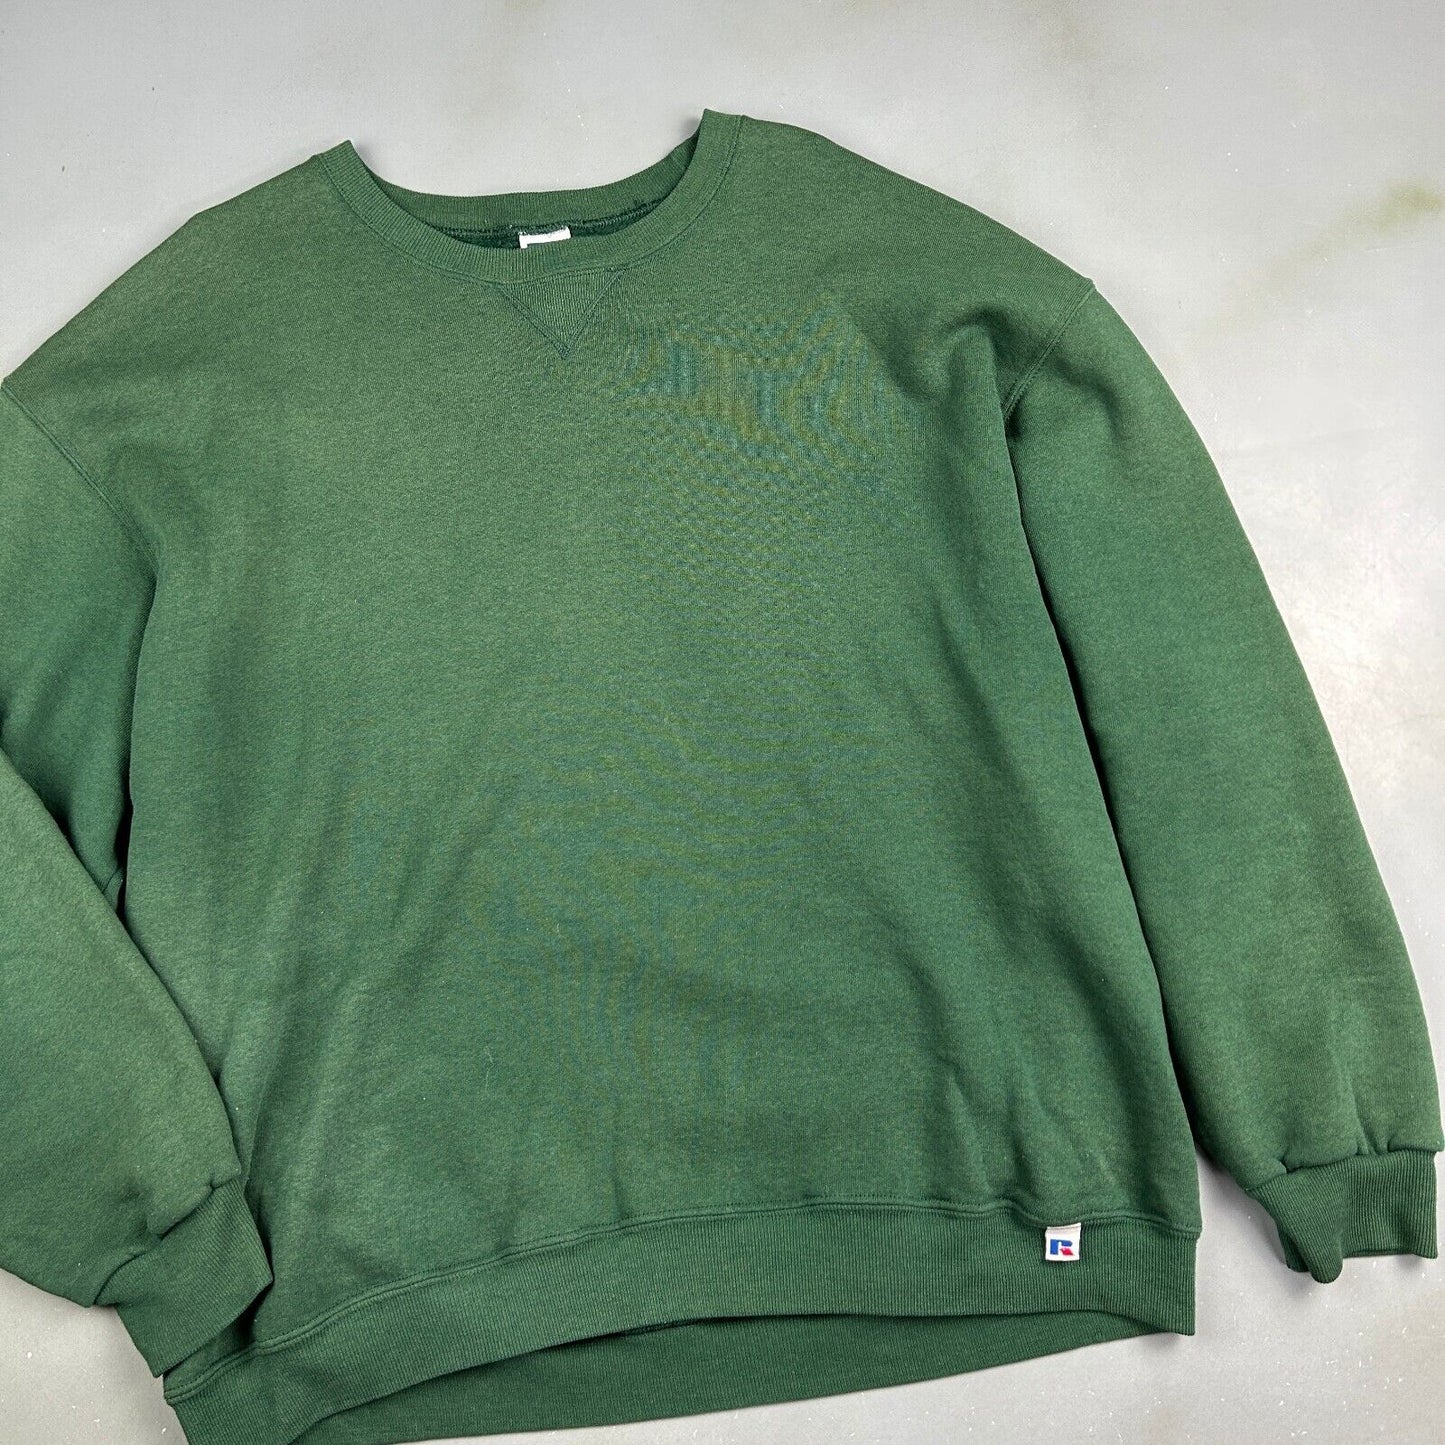 VINTAGE Russell Athletic Blank Green Crewneck Sweater sz XL Adult